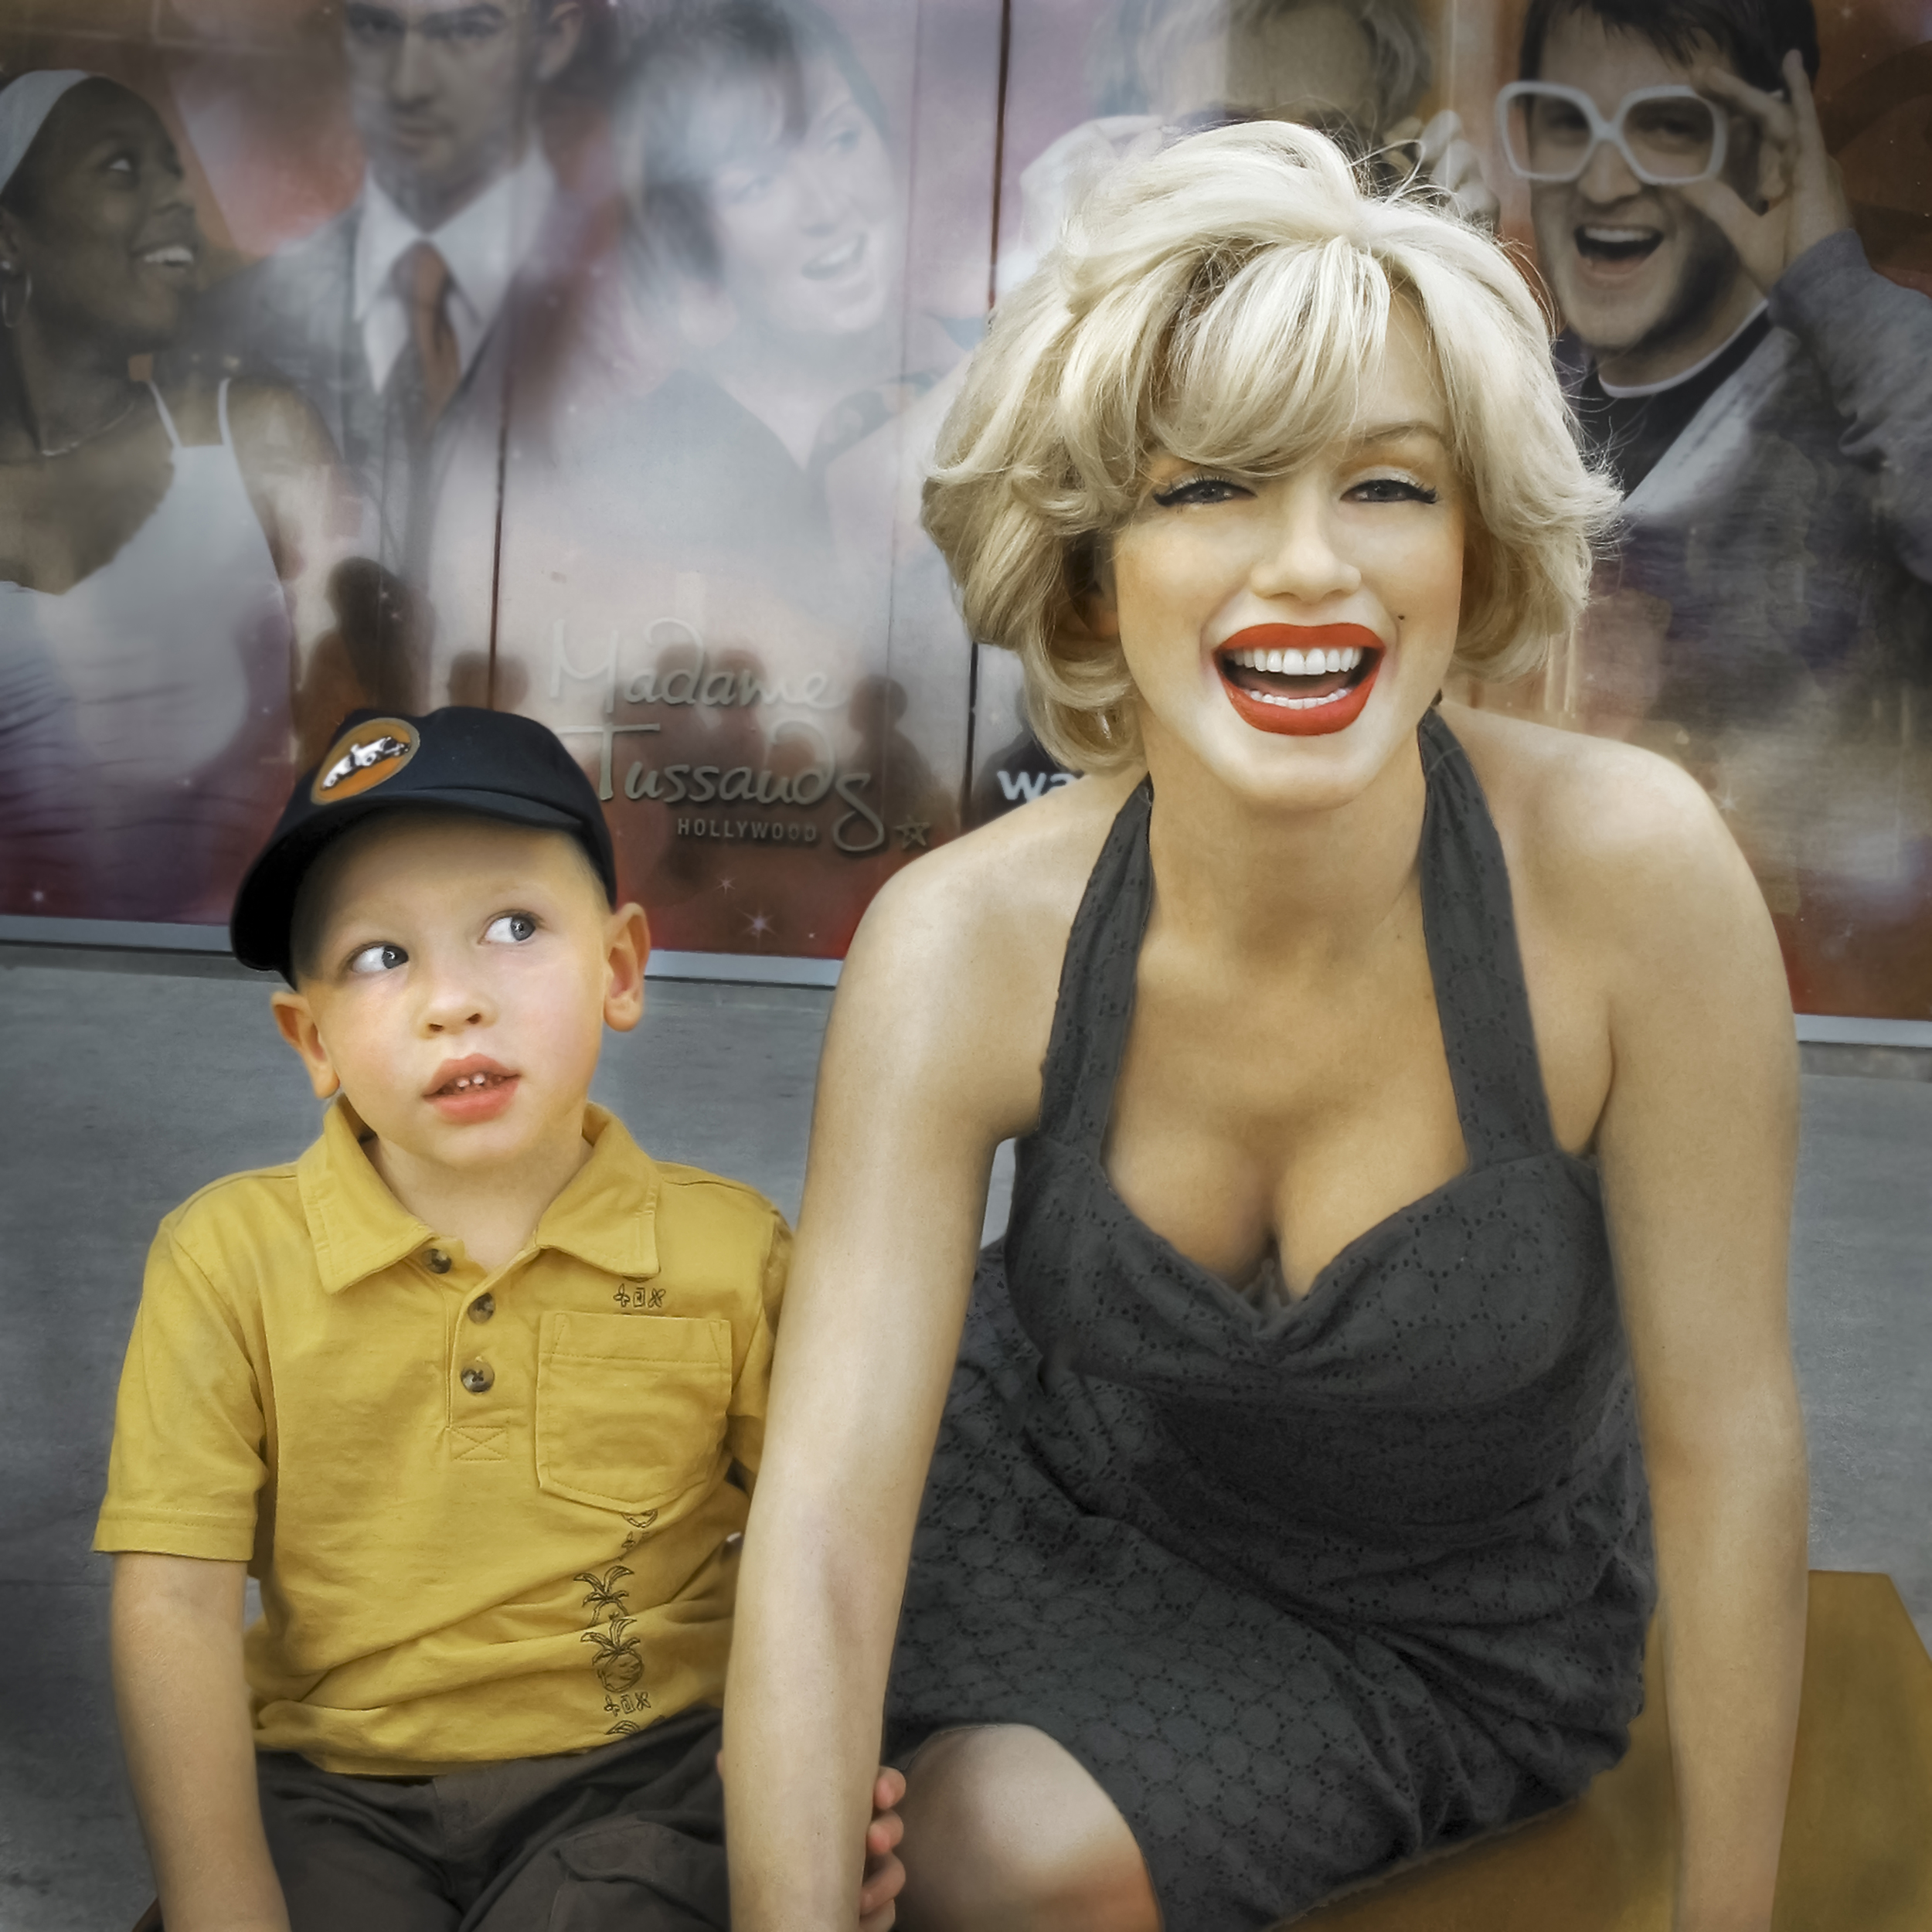 Colin and Marilyn